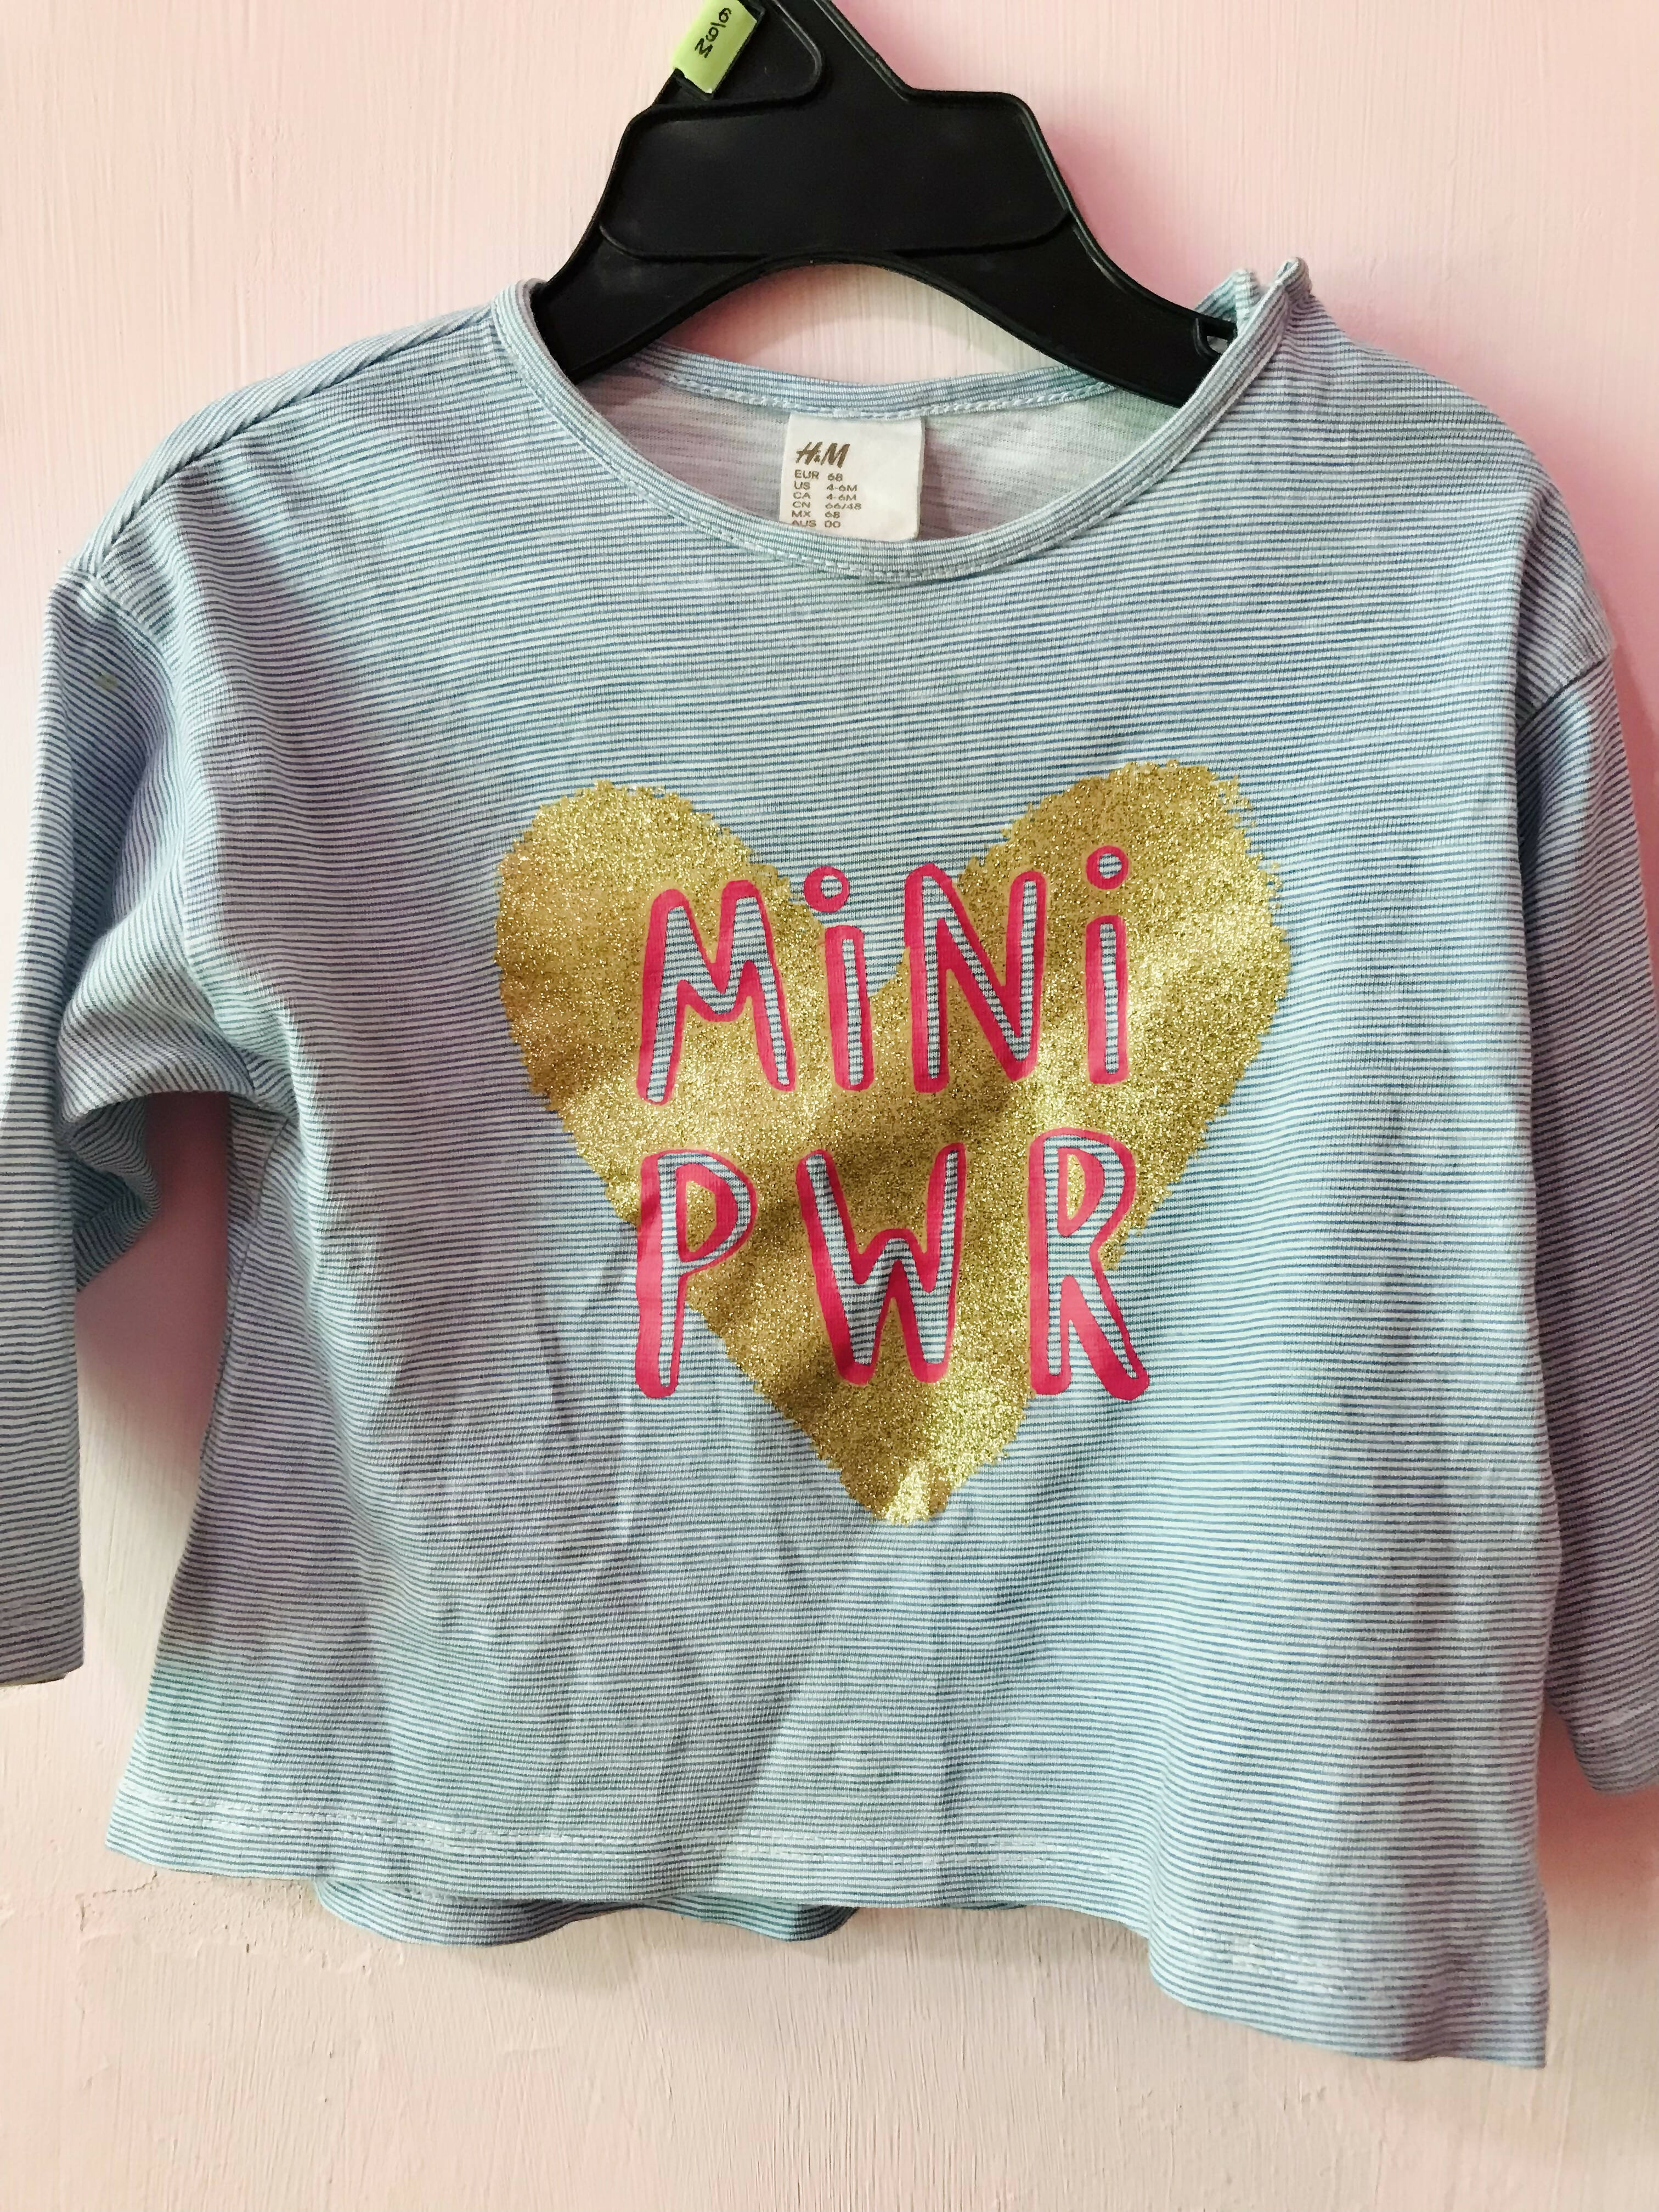 H&M | Baby shirt (Size: 3-8 months) | Girls Tops & Shirts | Worn Once